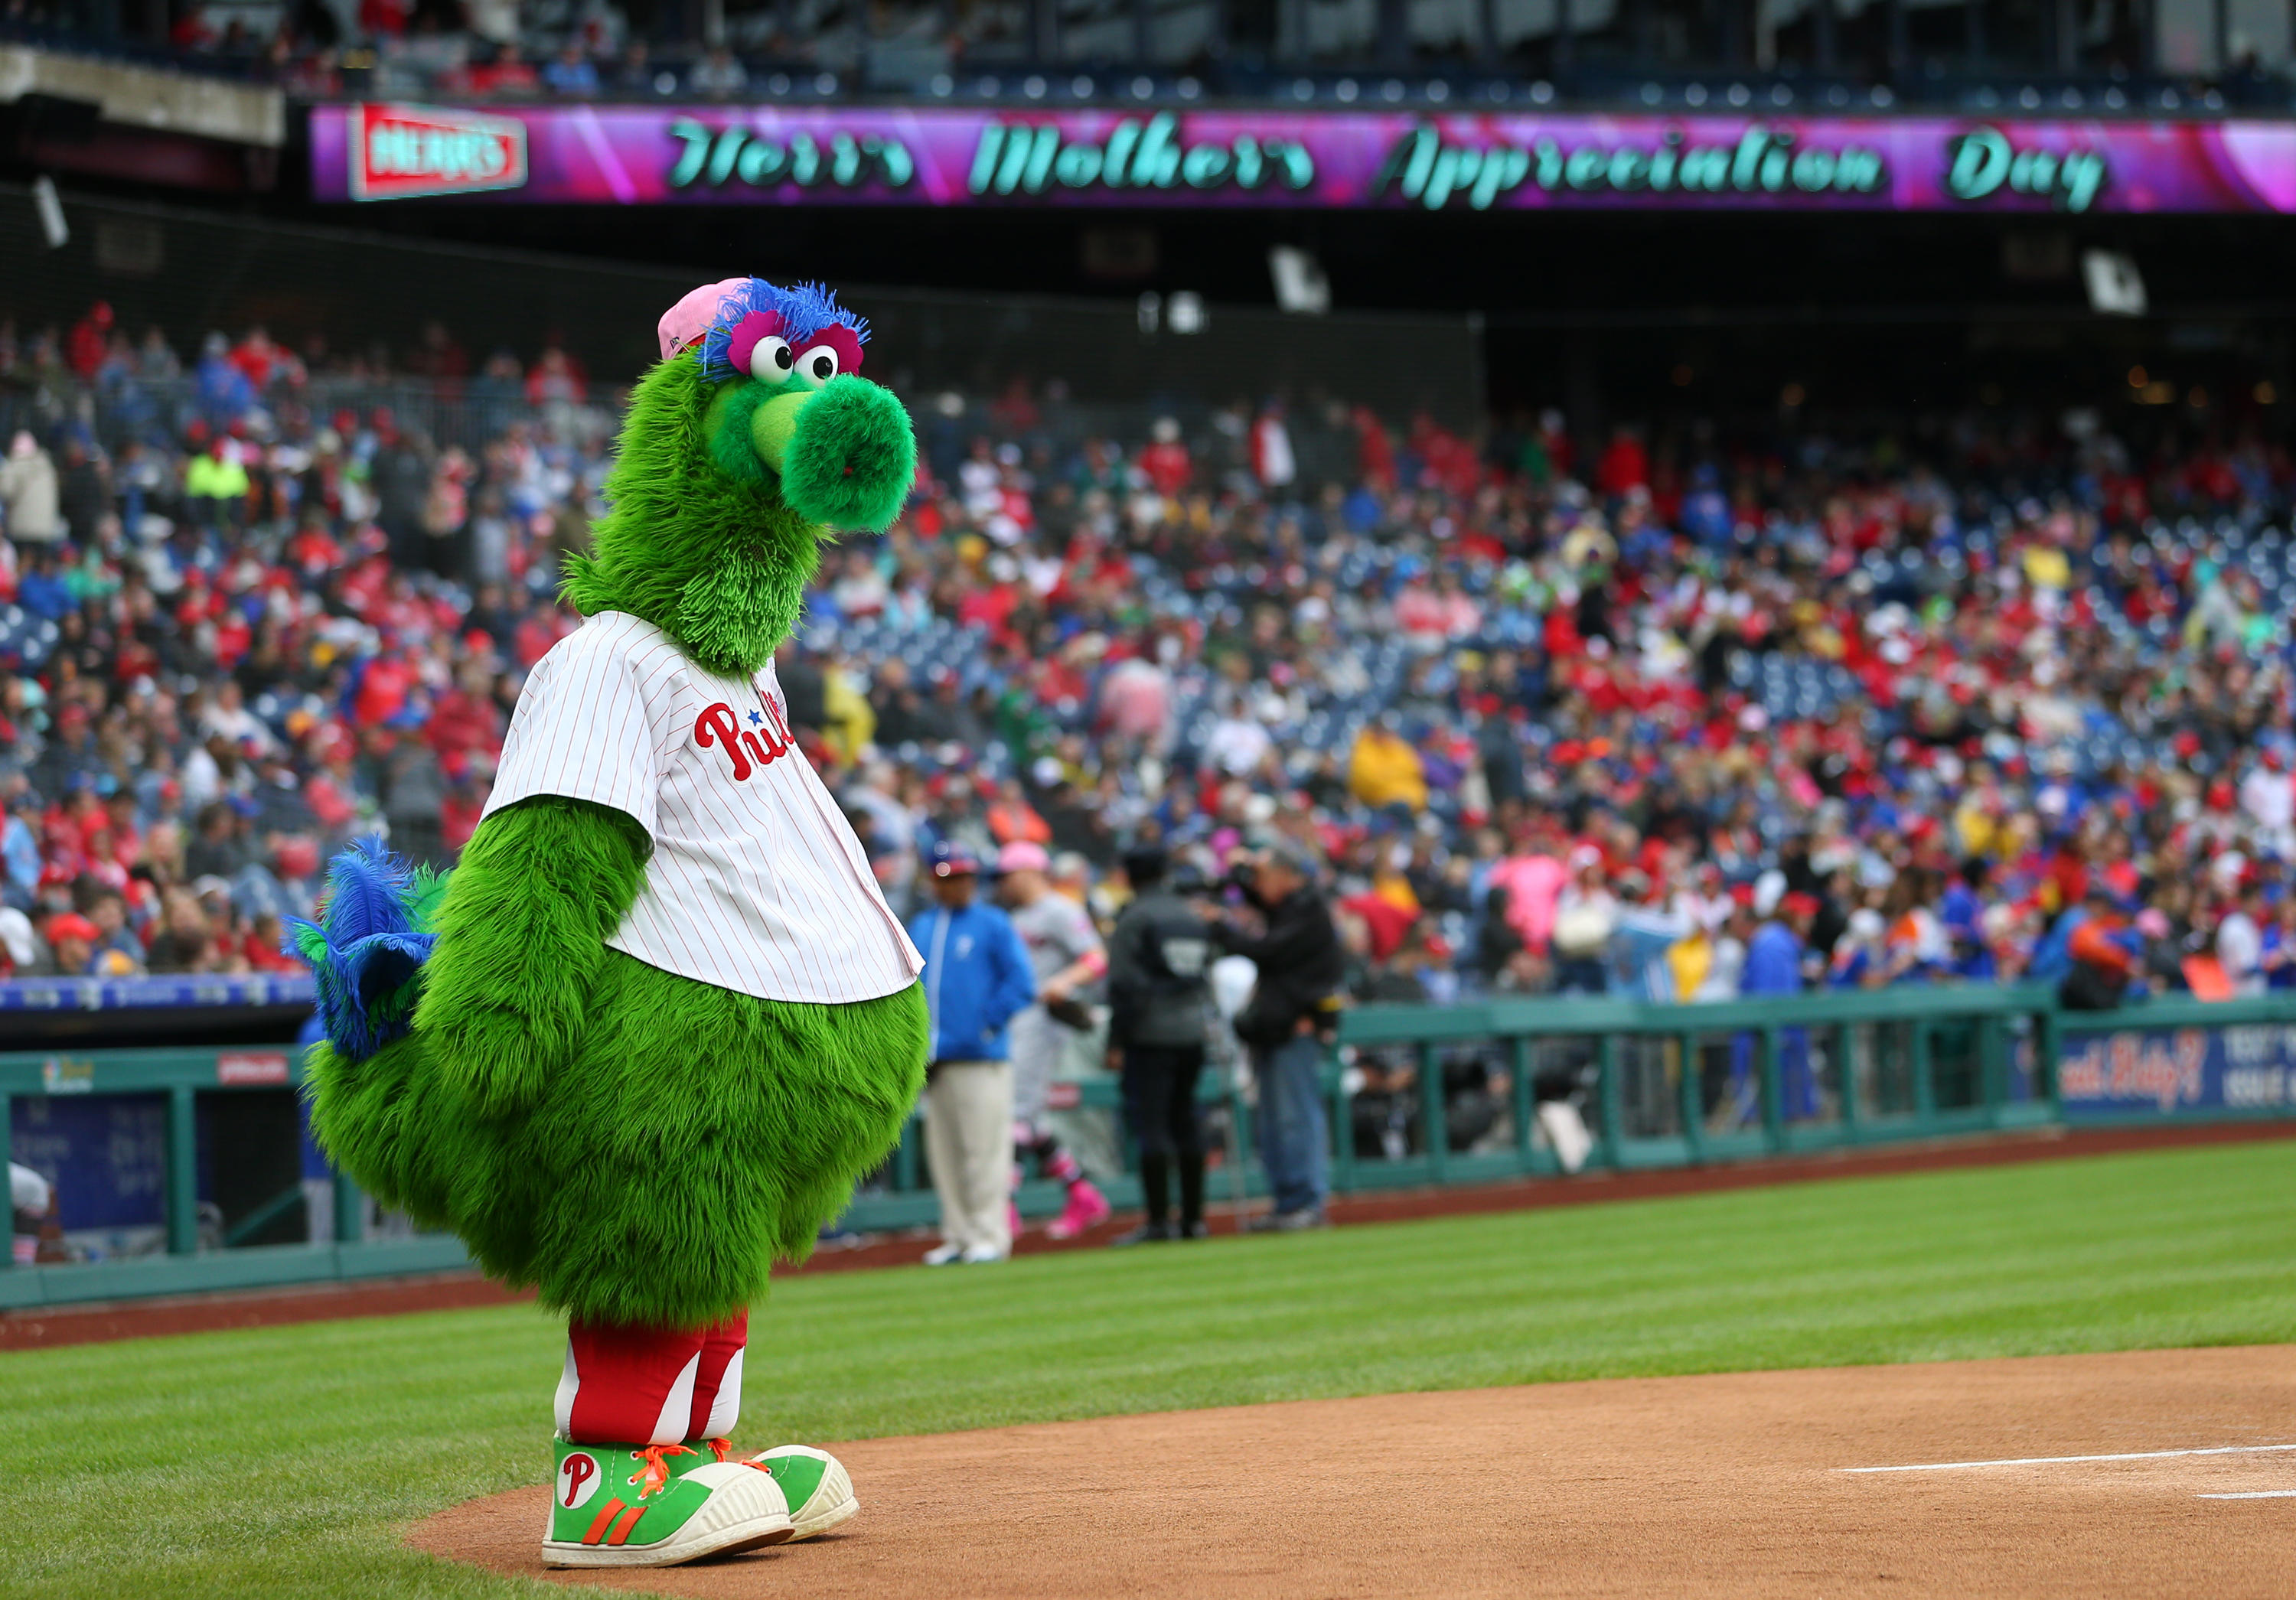 Philadelphia Phillies mascot Phillie Phanatic launches hot dog woman says  hit her in face, eye - CBS News